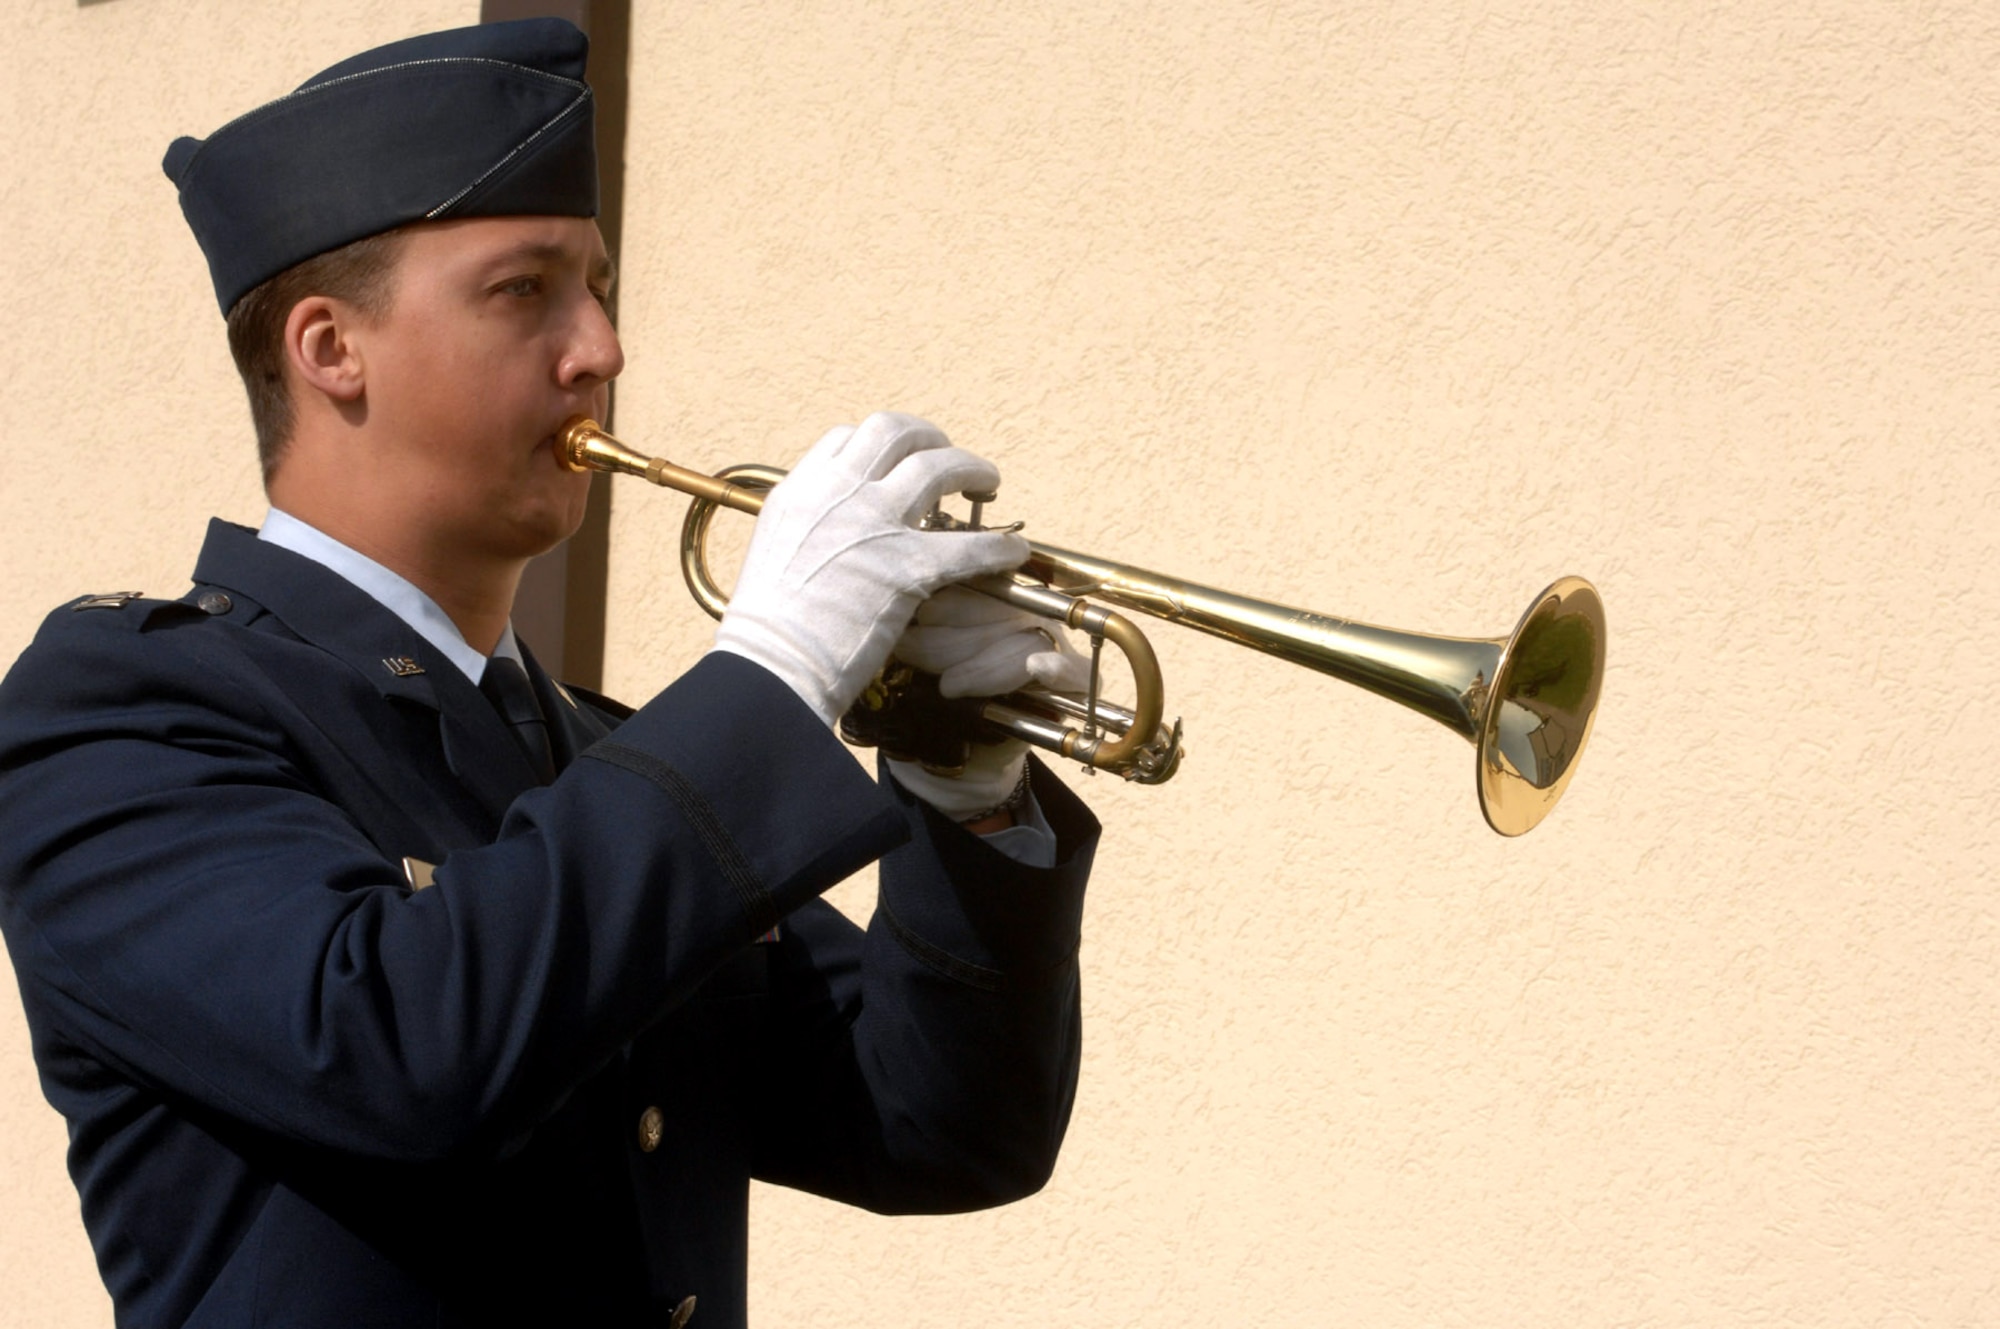 Capt. Mike McCarthy plays "Taps" during a ceremony memorializing the life of Maj. Troy Gilbert at Bitburg High School April 5 near Spangdhalem Air Base, Germany. Major Gilbert, a BHS graduate, lost his life while serving in support of Operation Iraqi Freedom Nov. 26 while he was on a mission providing combat support to an Army helicopter crew that had crashed as well as the ground forces trying to reach the crash site in the Anbar Province, 20 miles northwest of Baghdad. Captain McCarthy is assigned to the 23rd Fighter Squadron, Major Gilbert's former unit. (U.S. Air Force photo/Airman 1st Class Emily Moore)